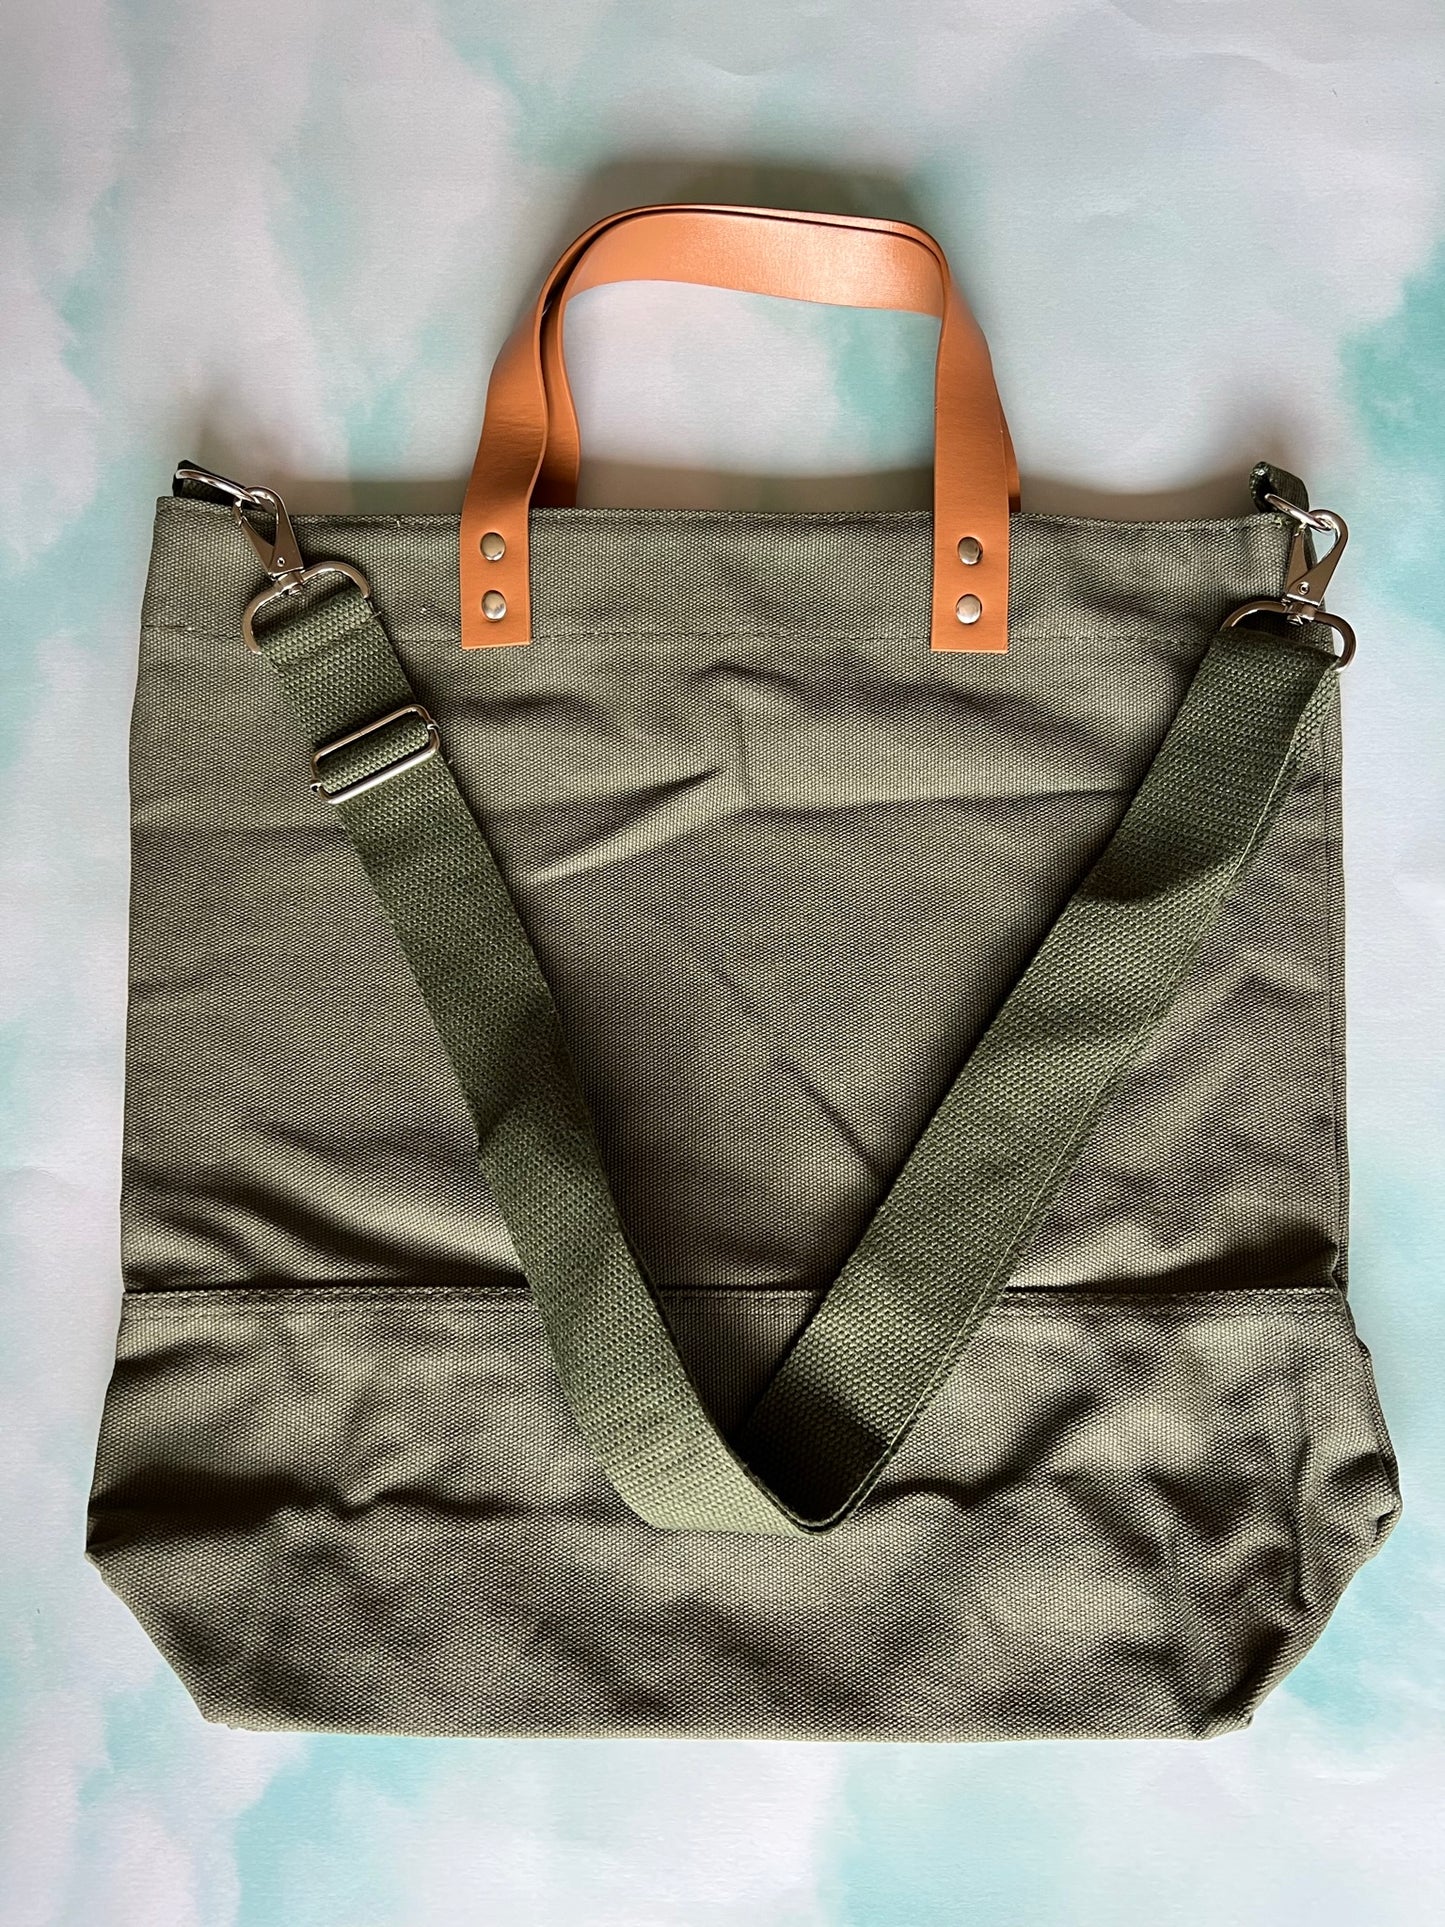 Large Totes with Leather Handles